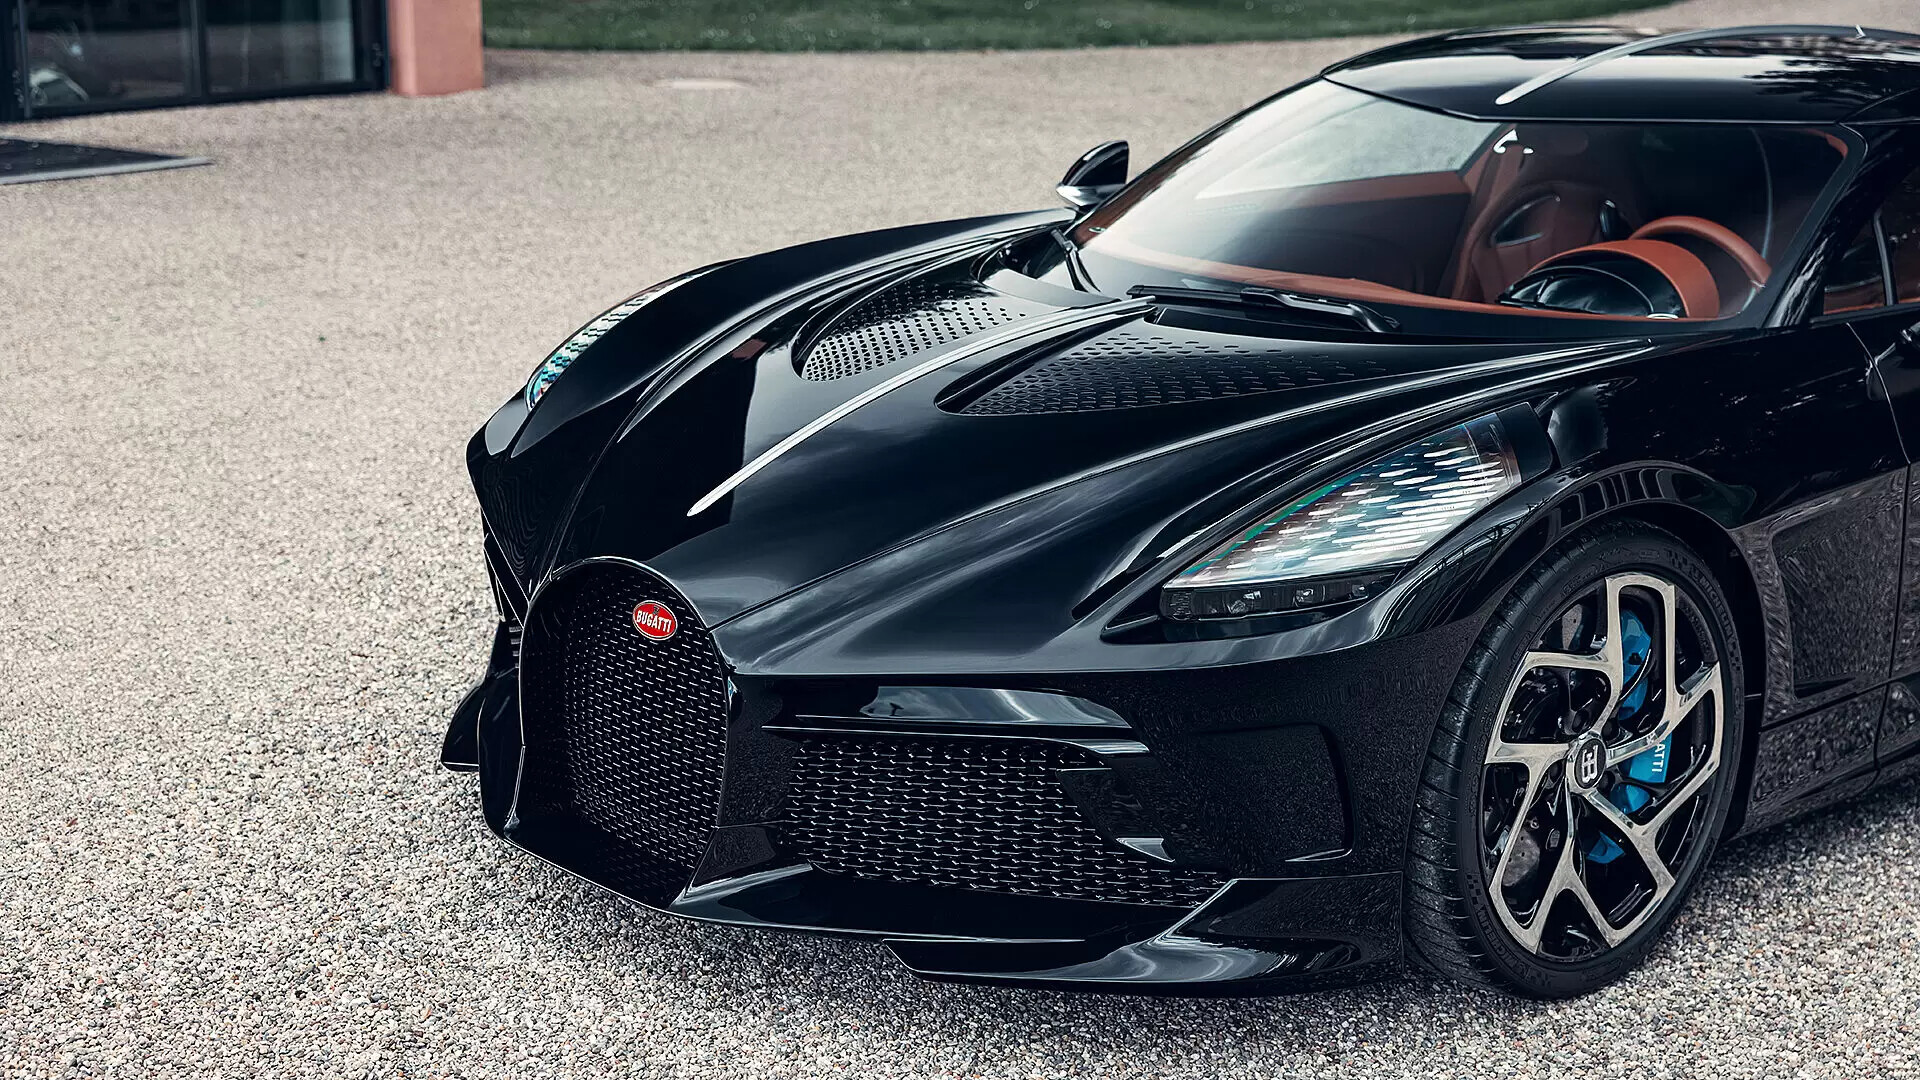 Bugatti La Voiture Noire: $13.4 million one-of-a-kind French hypercar, Luxury automobile. 1920x1080 Full HD Background.